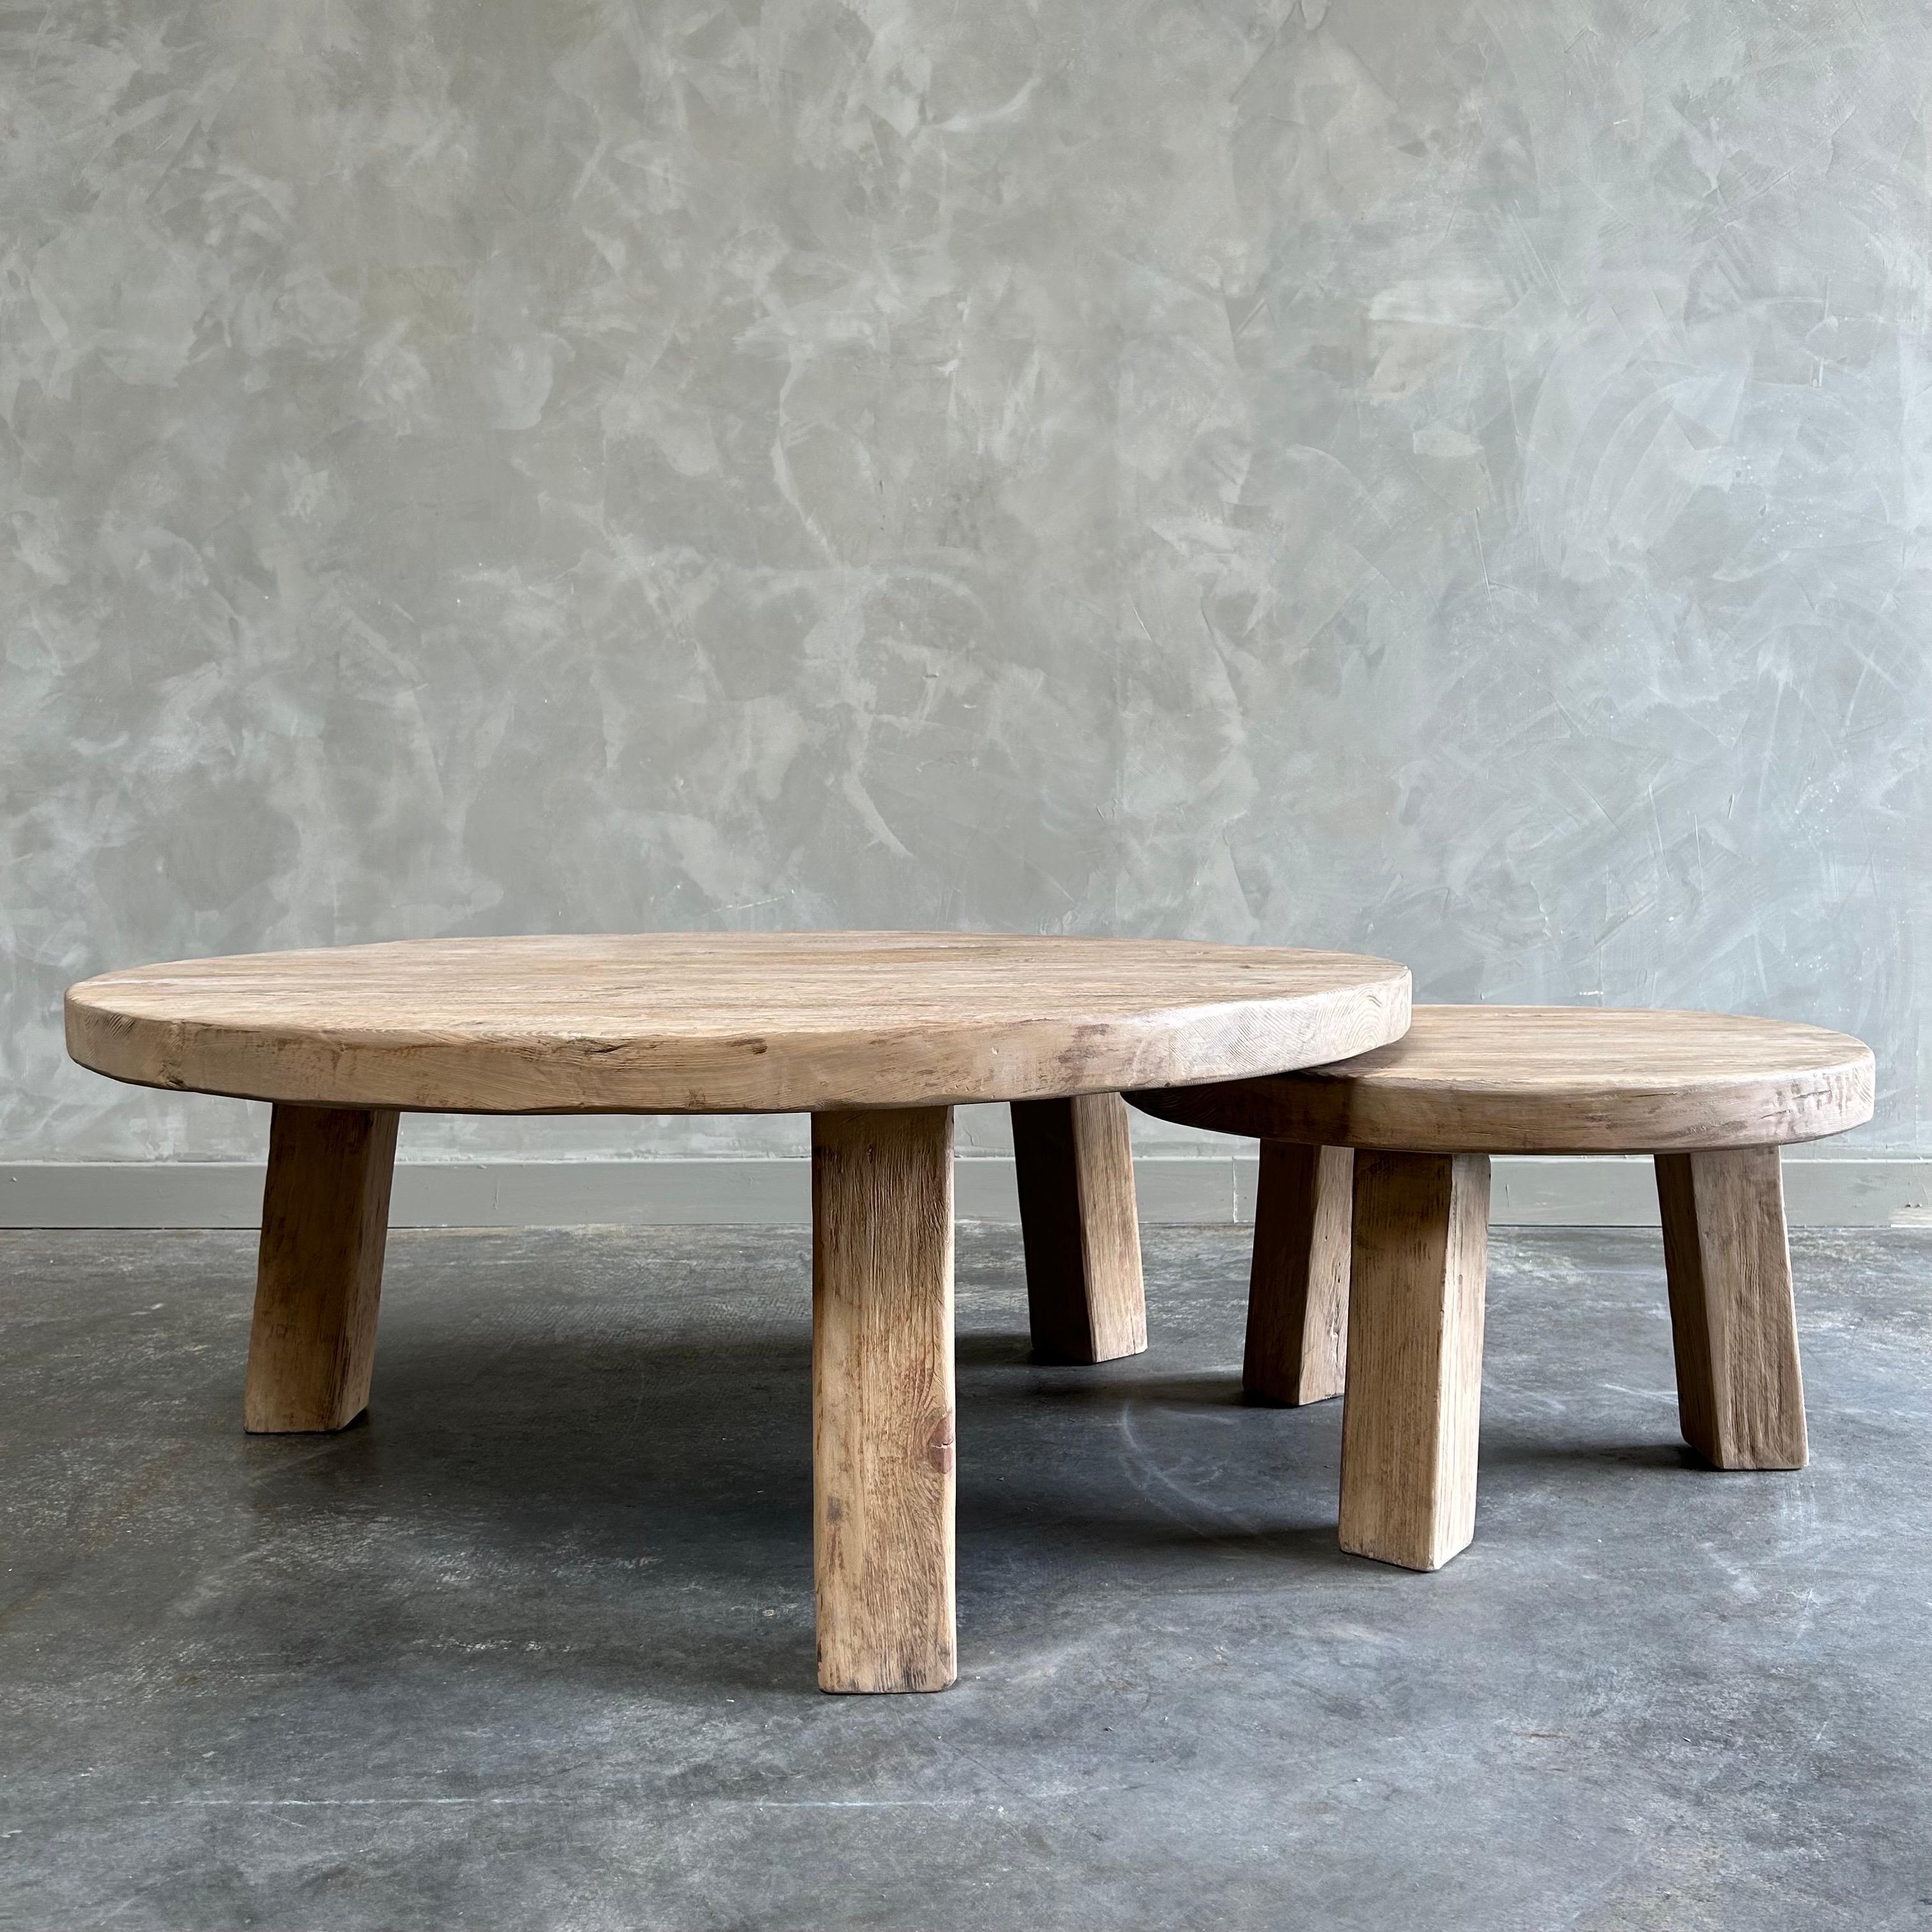 Nesting cocktail table.

Nesting cocktail table. Solid elm wood finished with a natural wax.

By bloom home inc. these old elm timbers show in its most primal, natural form. The artisanal construction methods highlight the elm woods beautiful grain